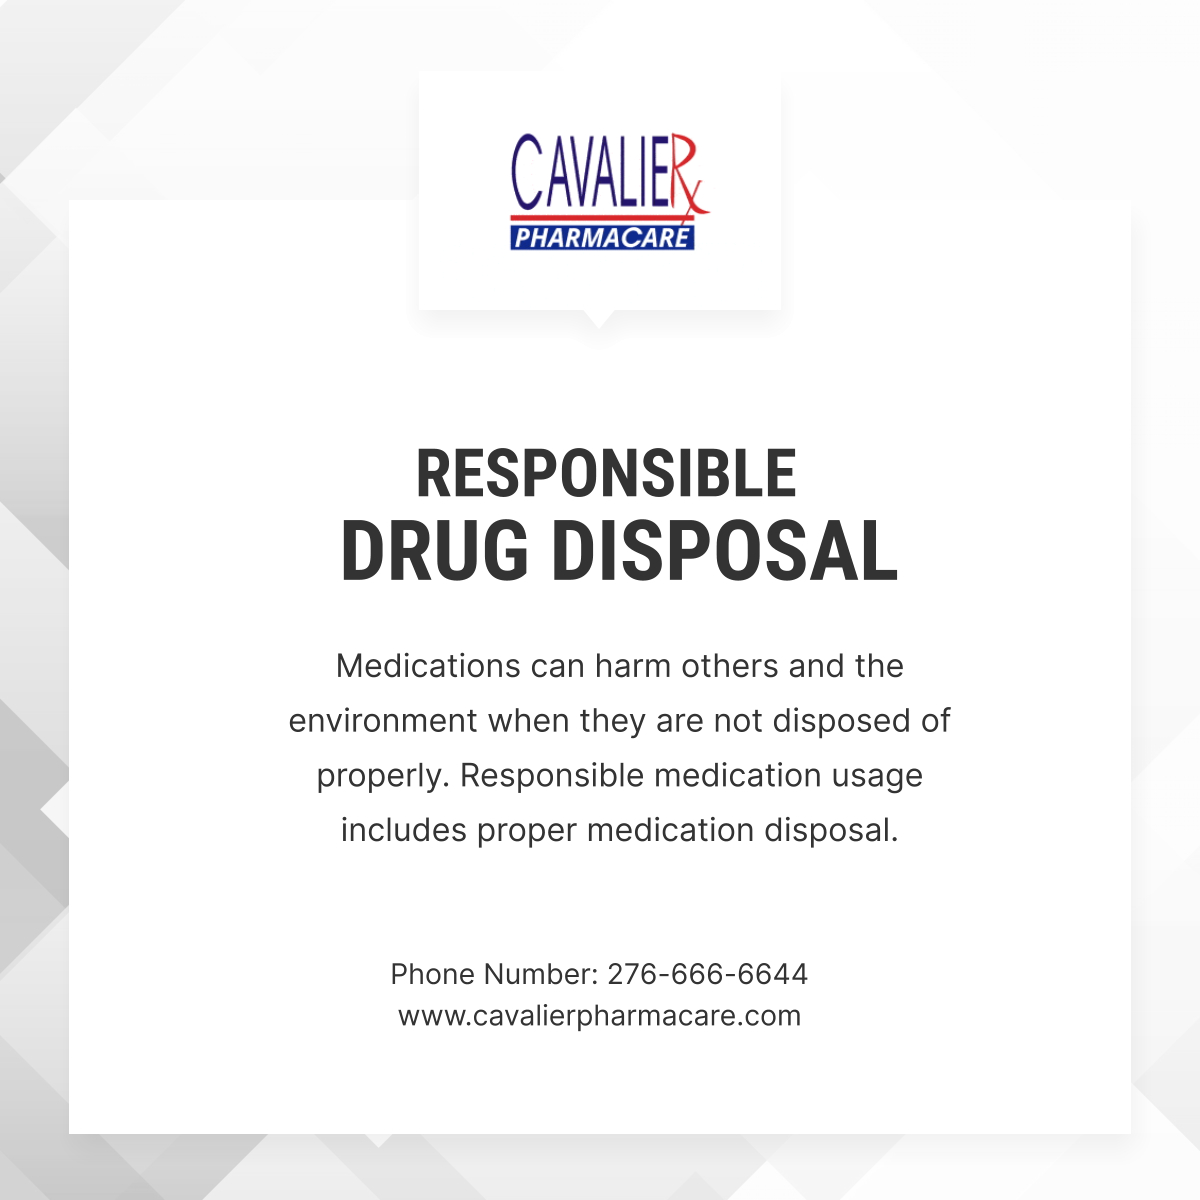 Disposing of your medications properly is a major part of responsible medication usage. Make sure you work with the right people to dispose of your unused medication the right way.

#MartinsvilleVA #PharmacyServices #DrugDisposal